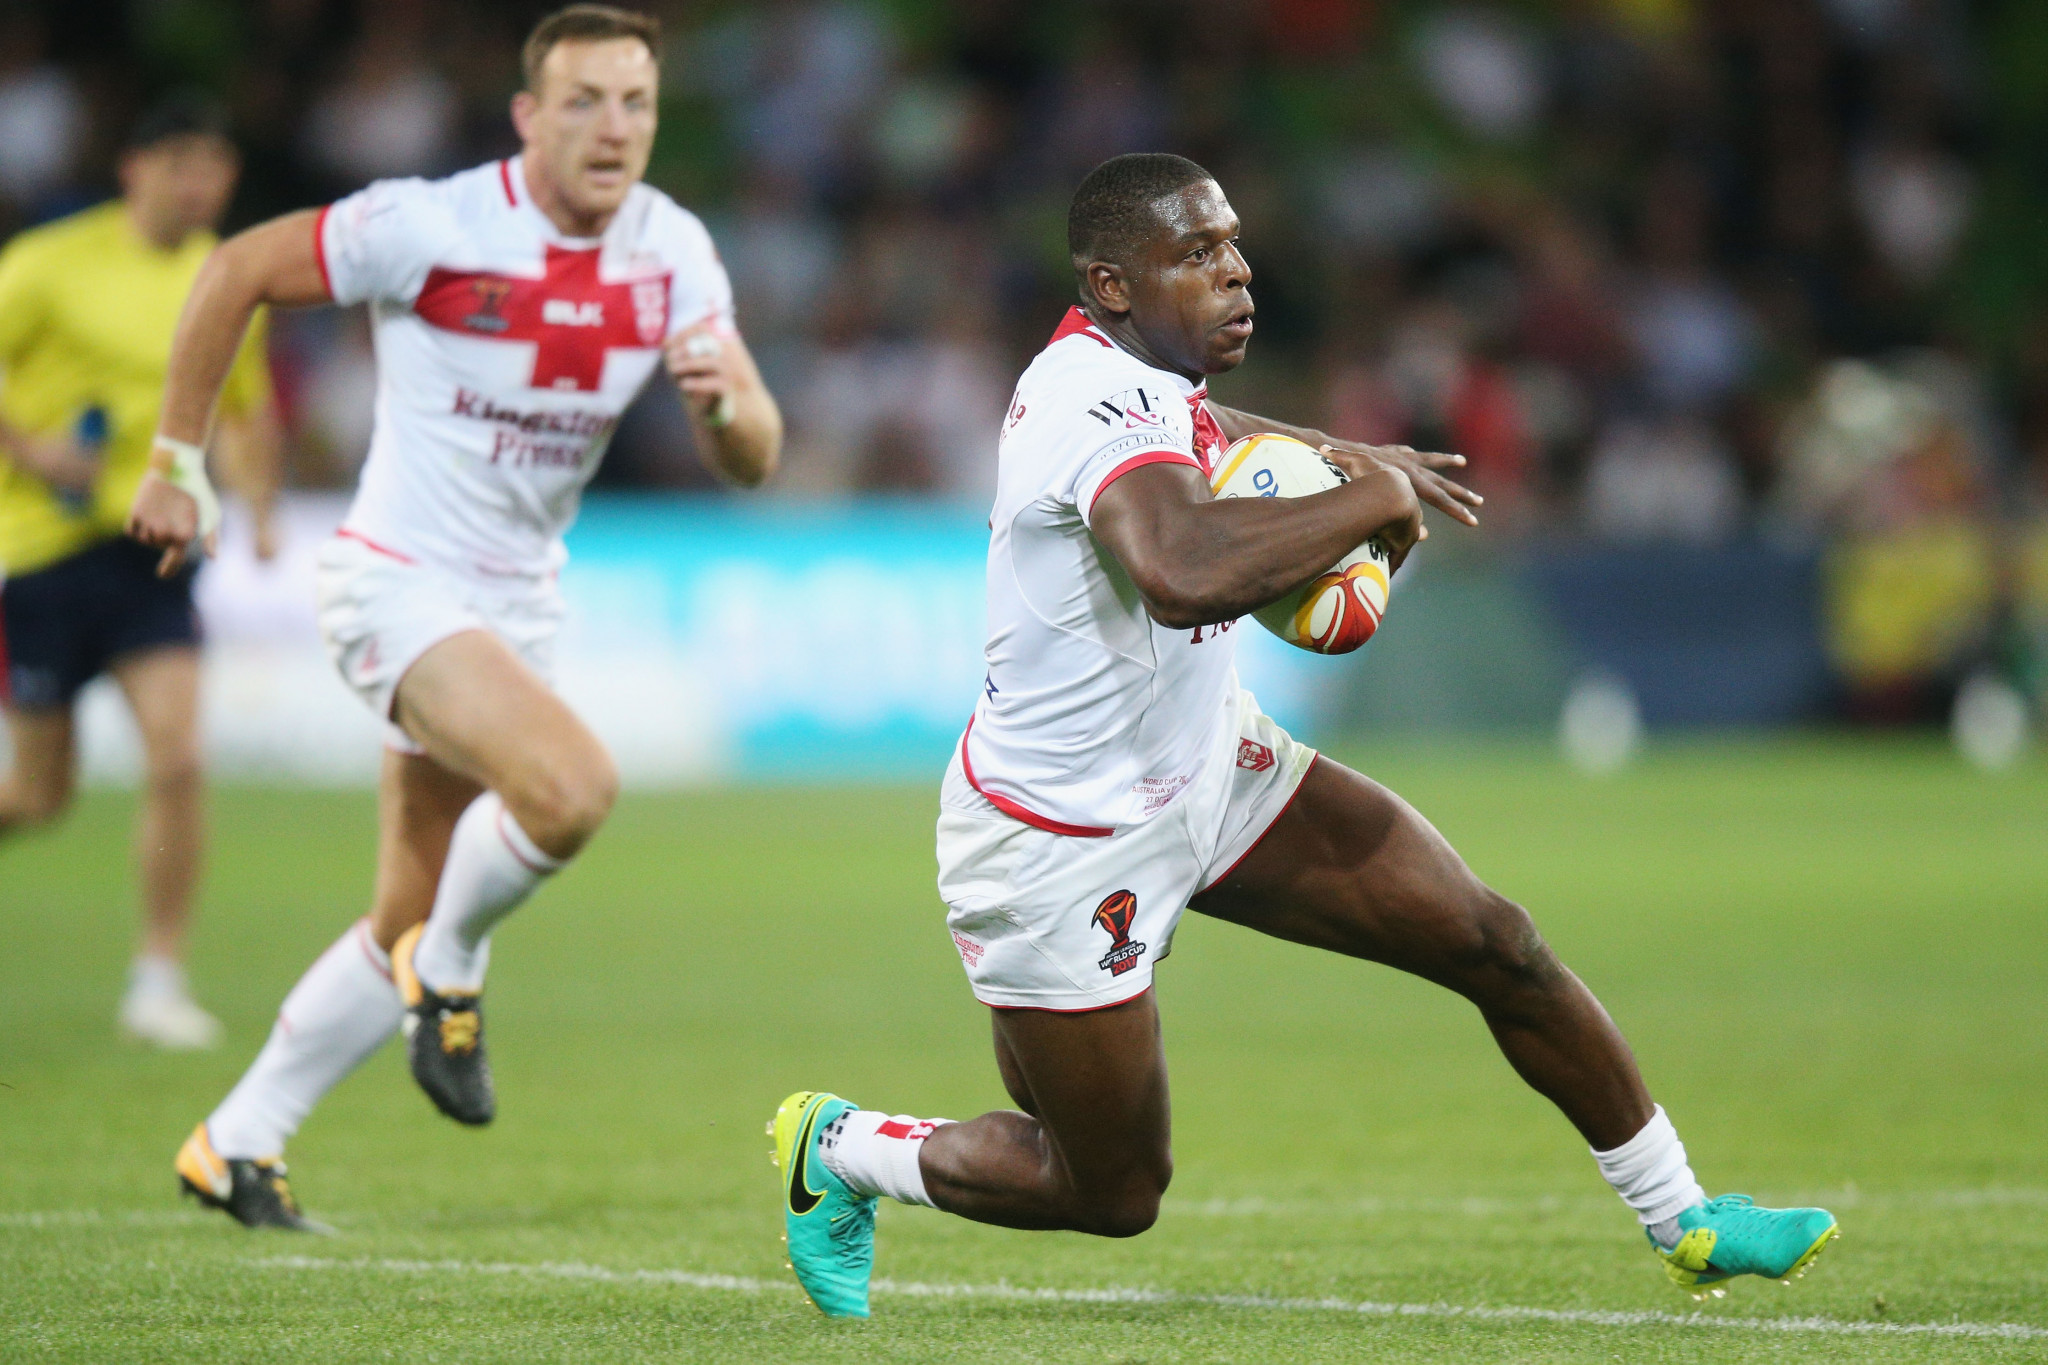 Jermaine McGillvary has been cleared of biting ©Getty Images